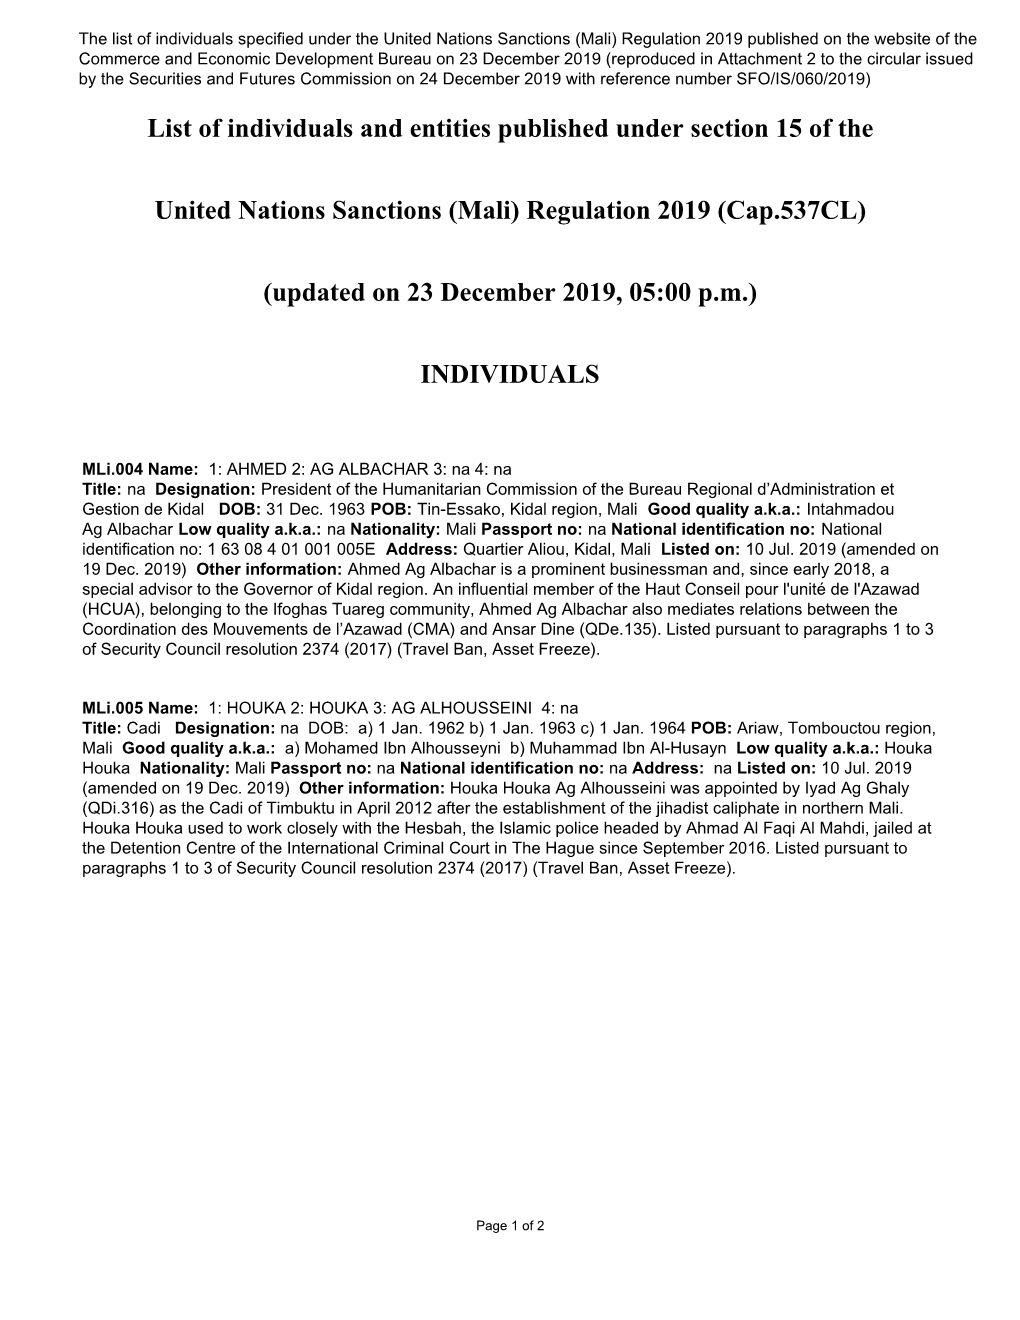 List of Individuals and Entities Published Under Section 15 of the United Nations Sanctions (Mali) Regulation 2019 (Cap.537CL) (